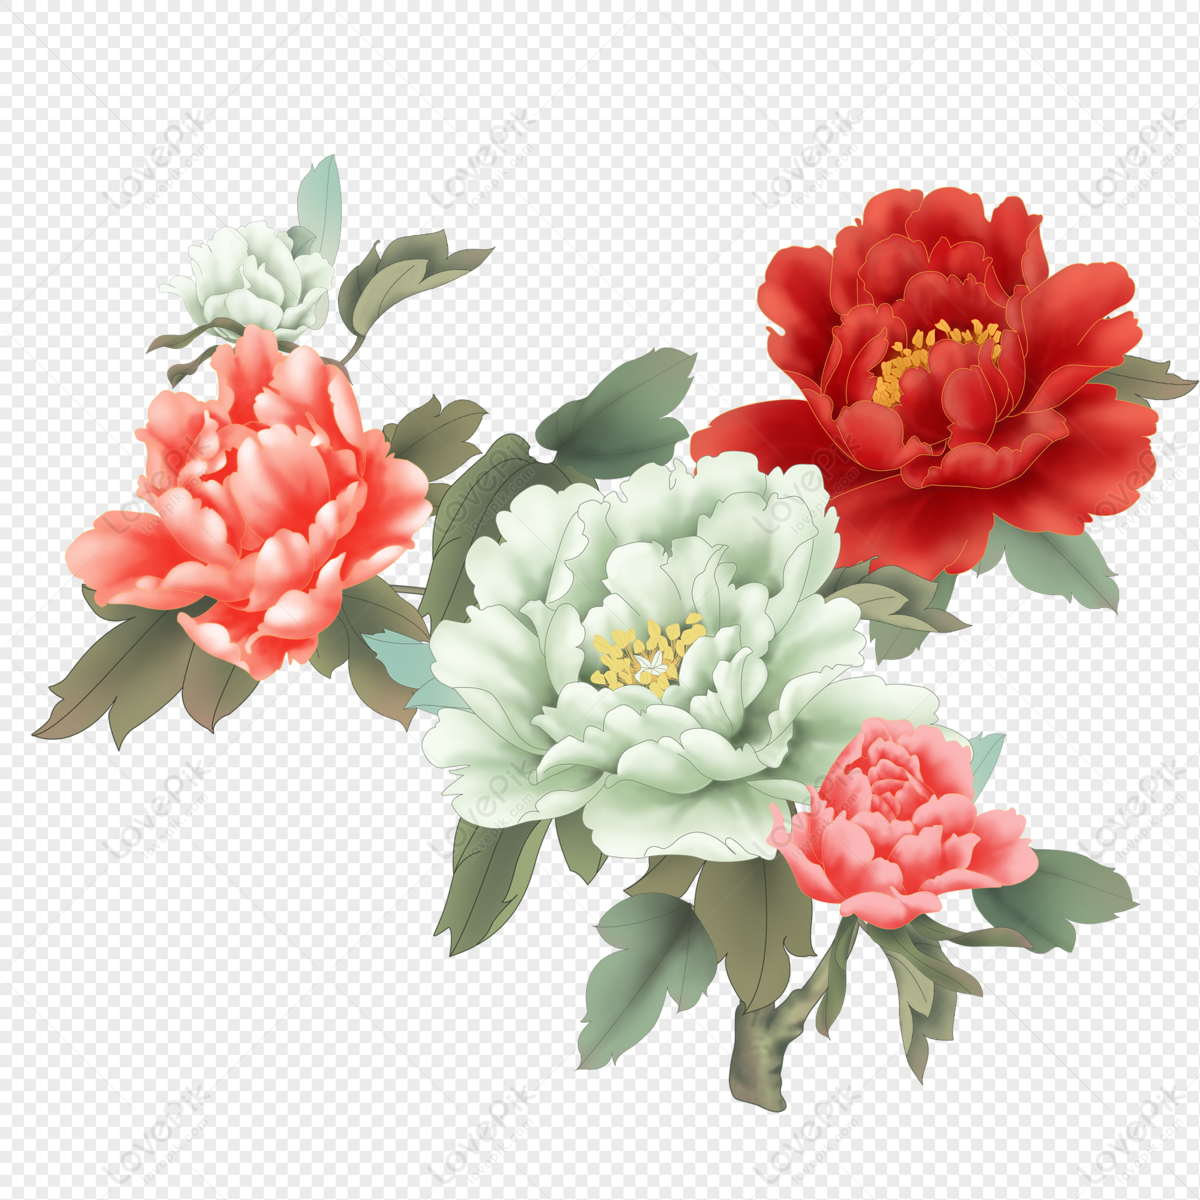 Peony PNG Picture And Clipart Image For Free Download - Lovepik | 401715895